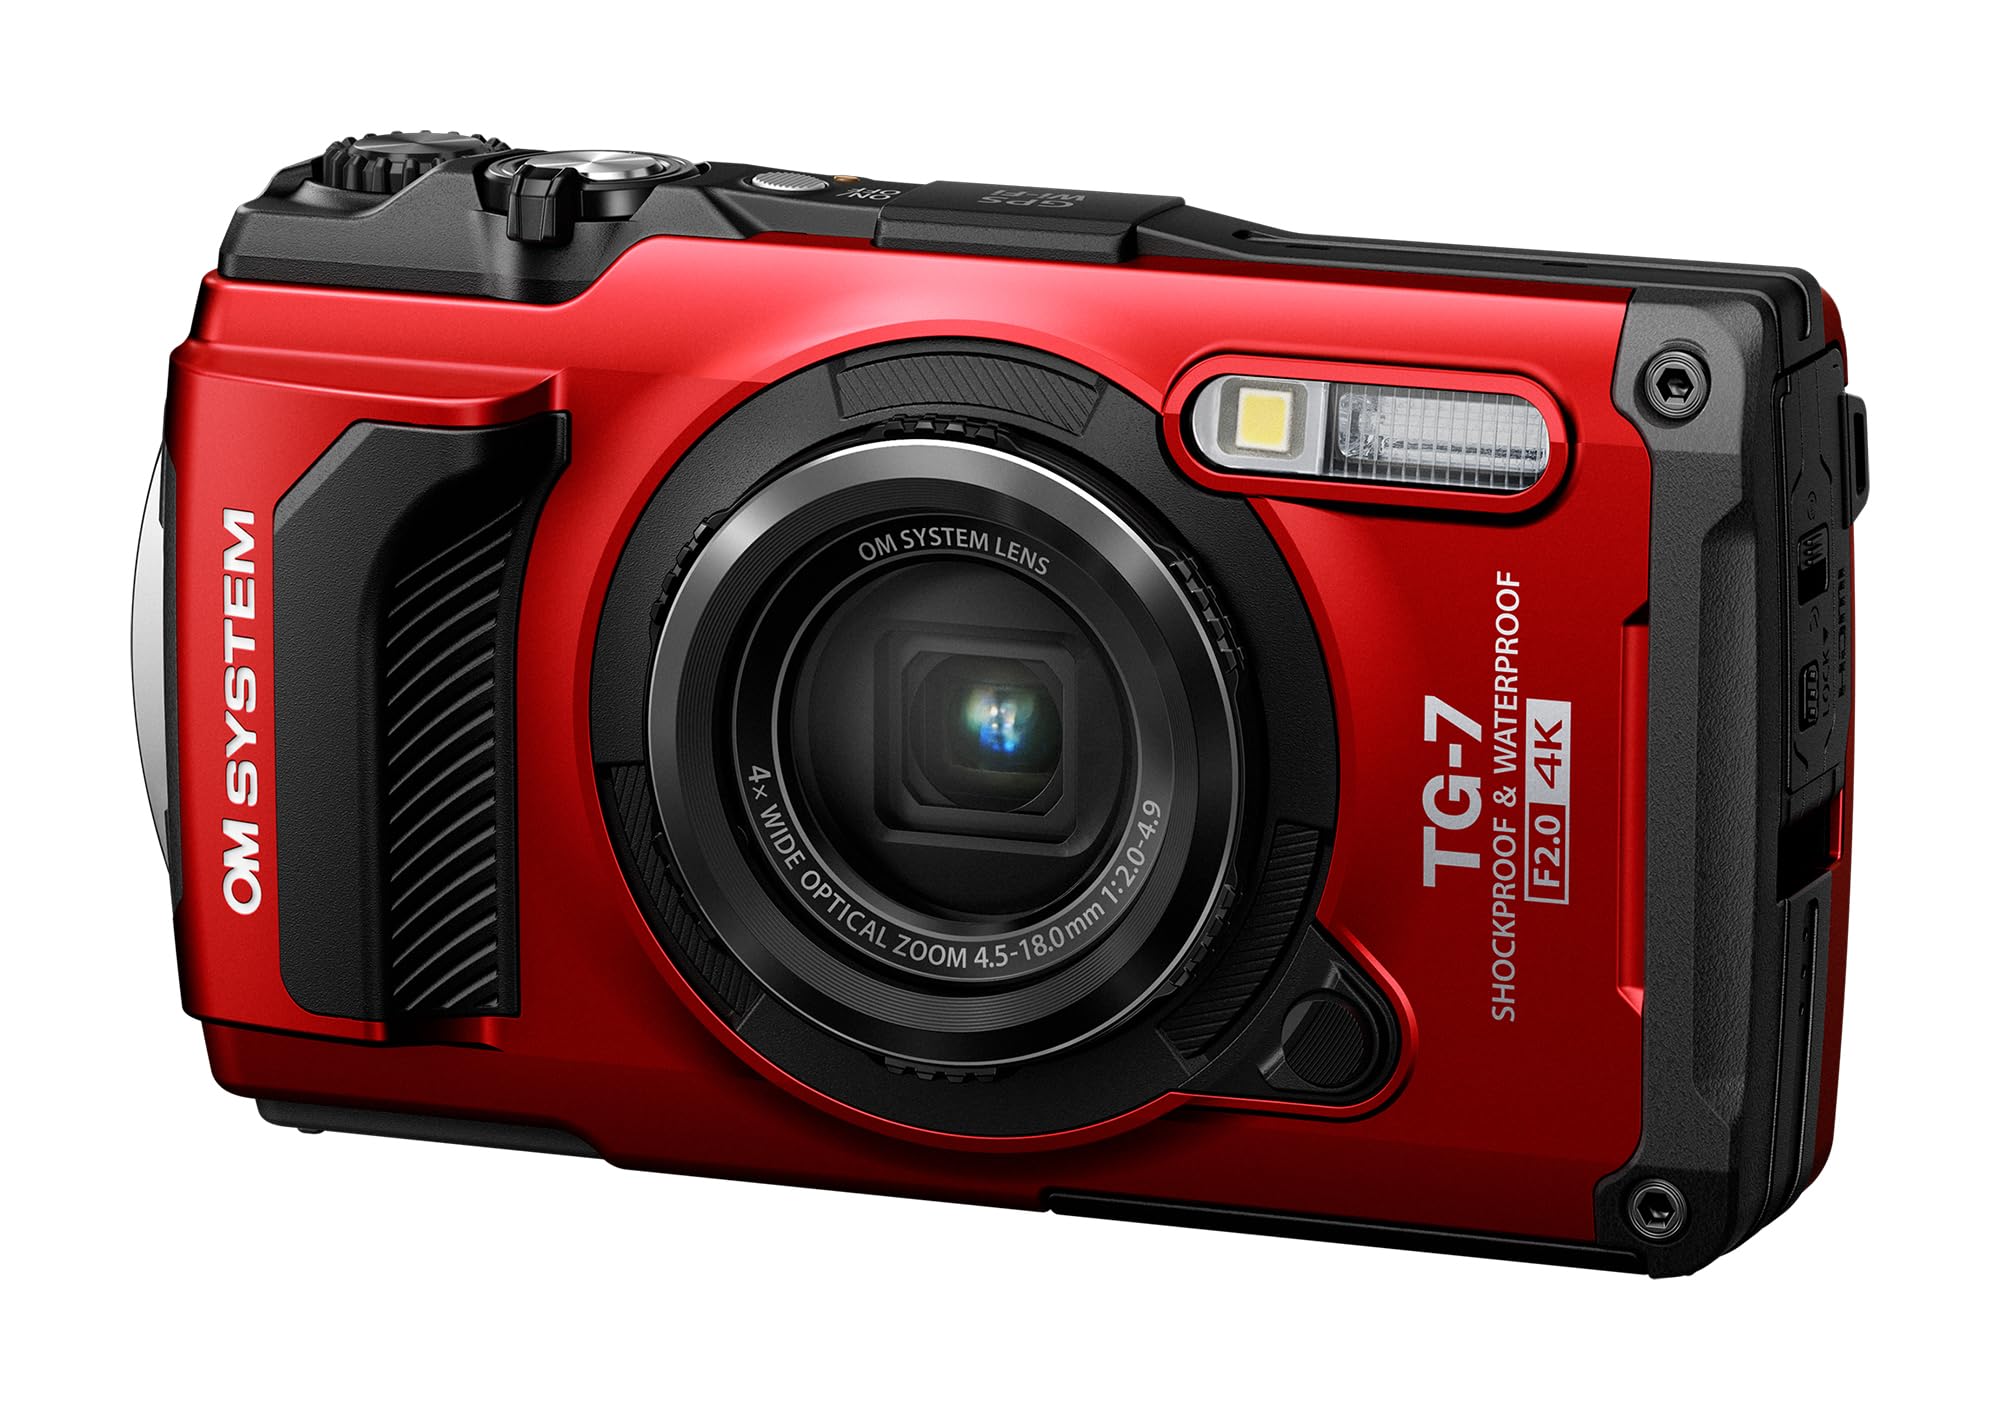 OM System Tough TG-7 Red Underwater Camera, Waterproof, Freeze Proof, High Resolution Bright, 4K Video 44x Macro Shooting